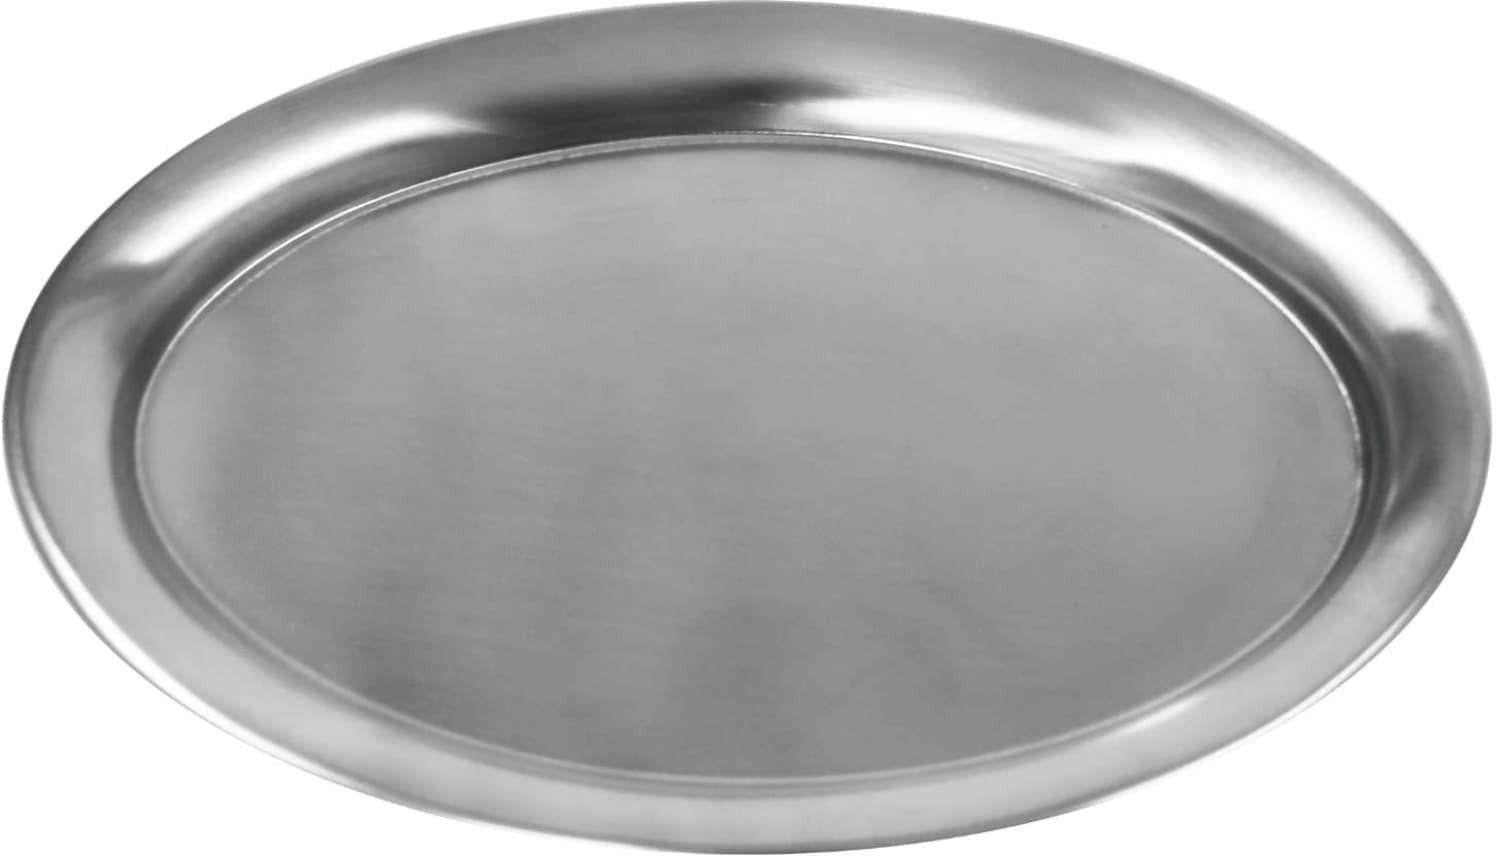 Serving trays oval matte finish